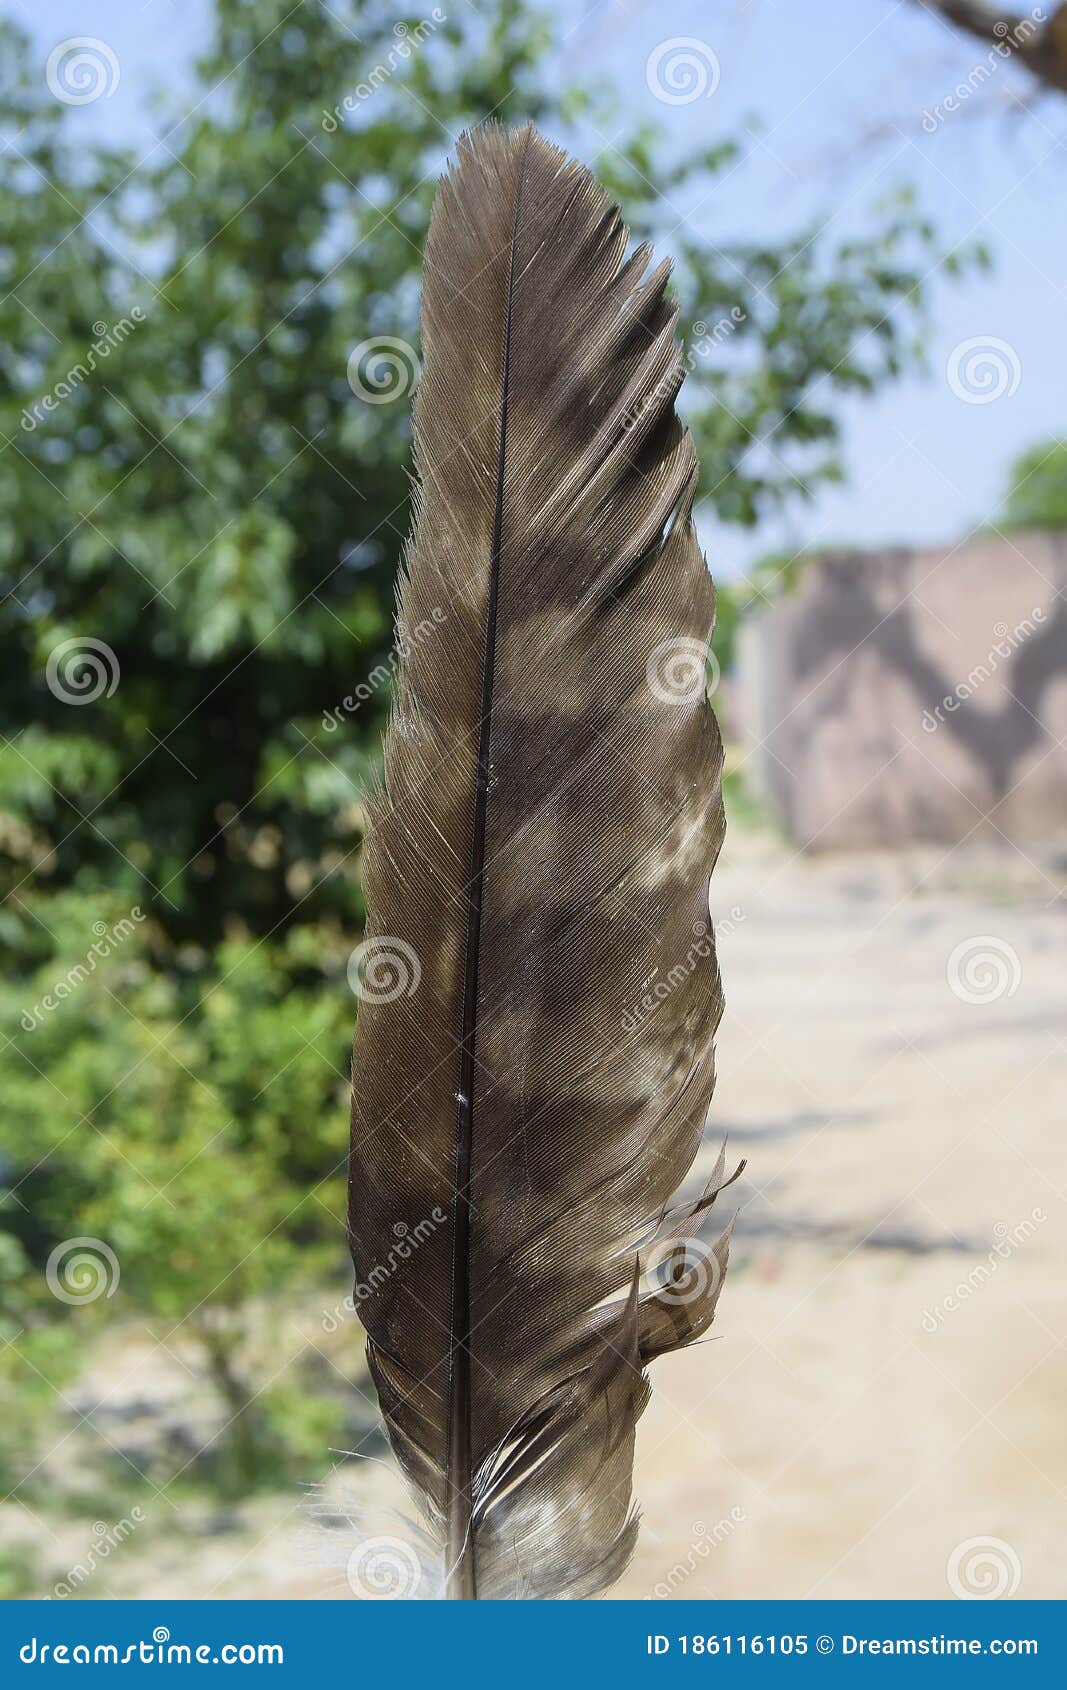 Brown and White Feather of the Bird, Beautiful Feather of the Bird